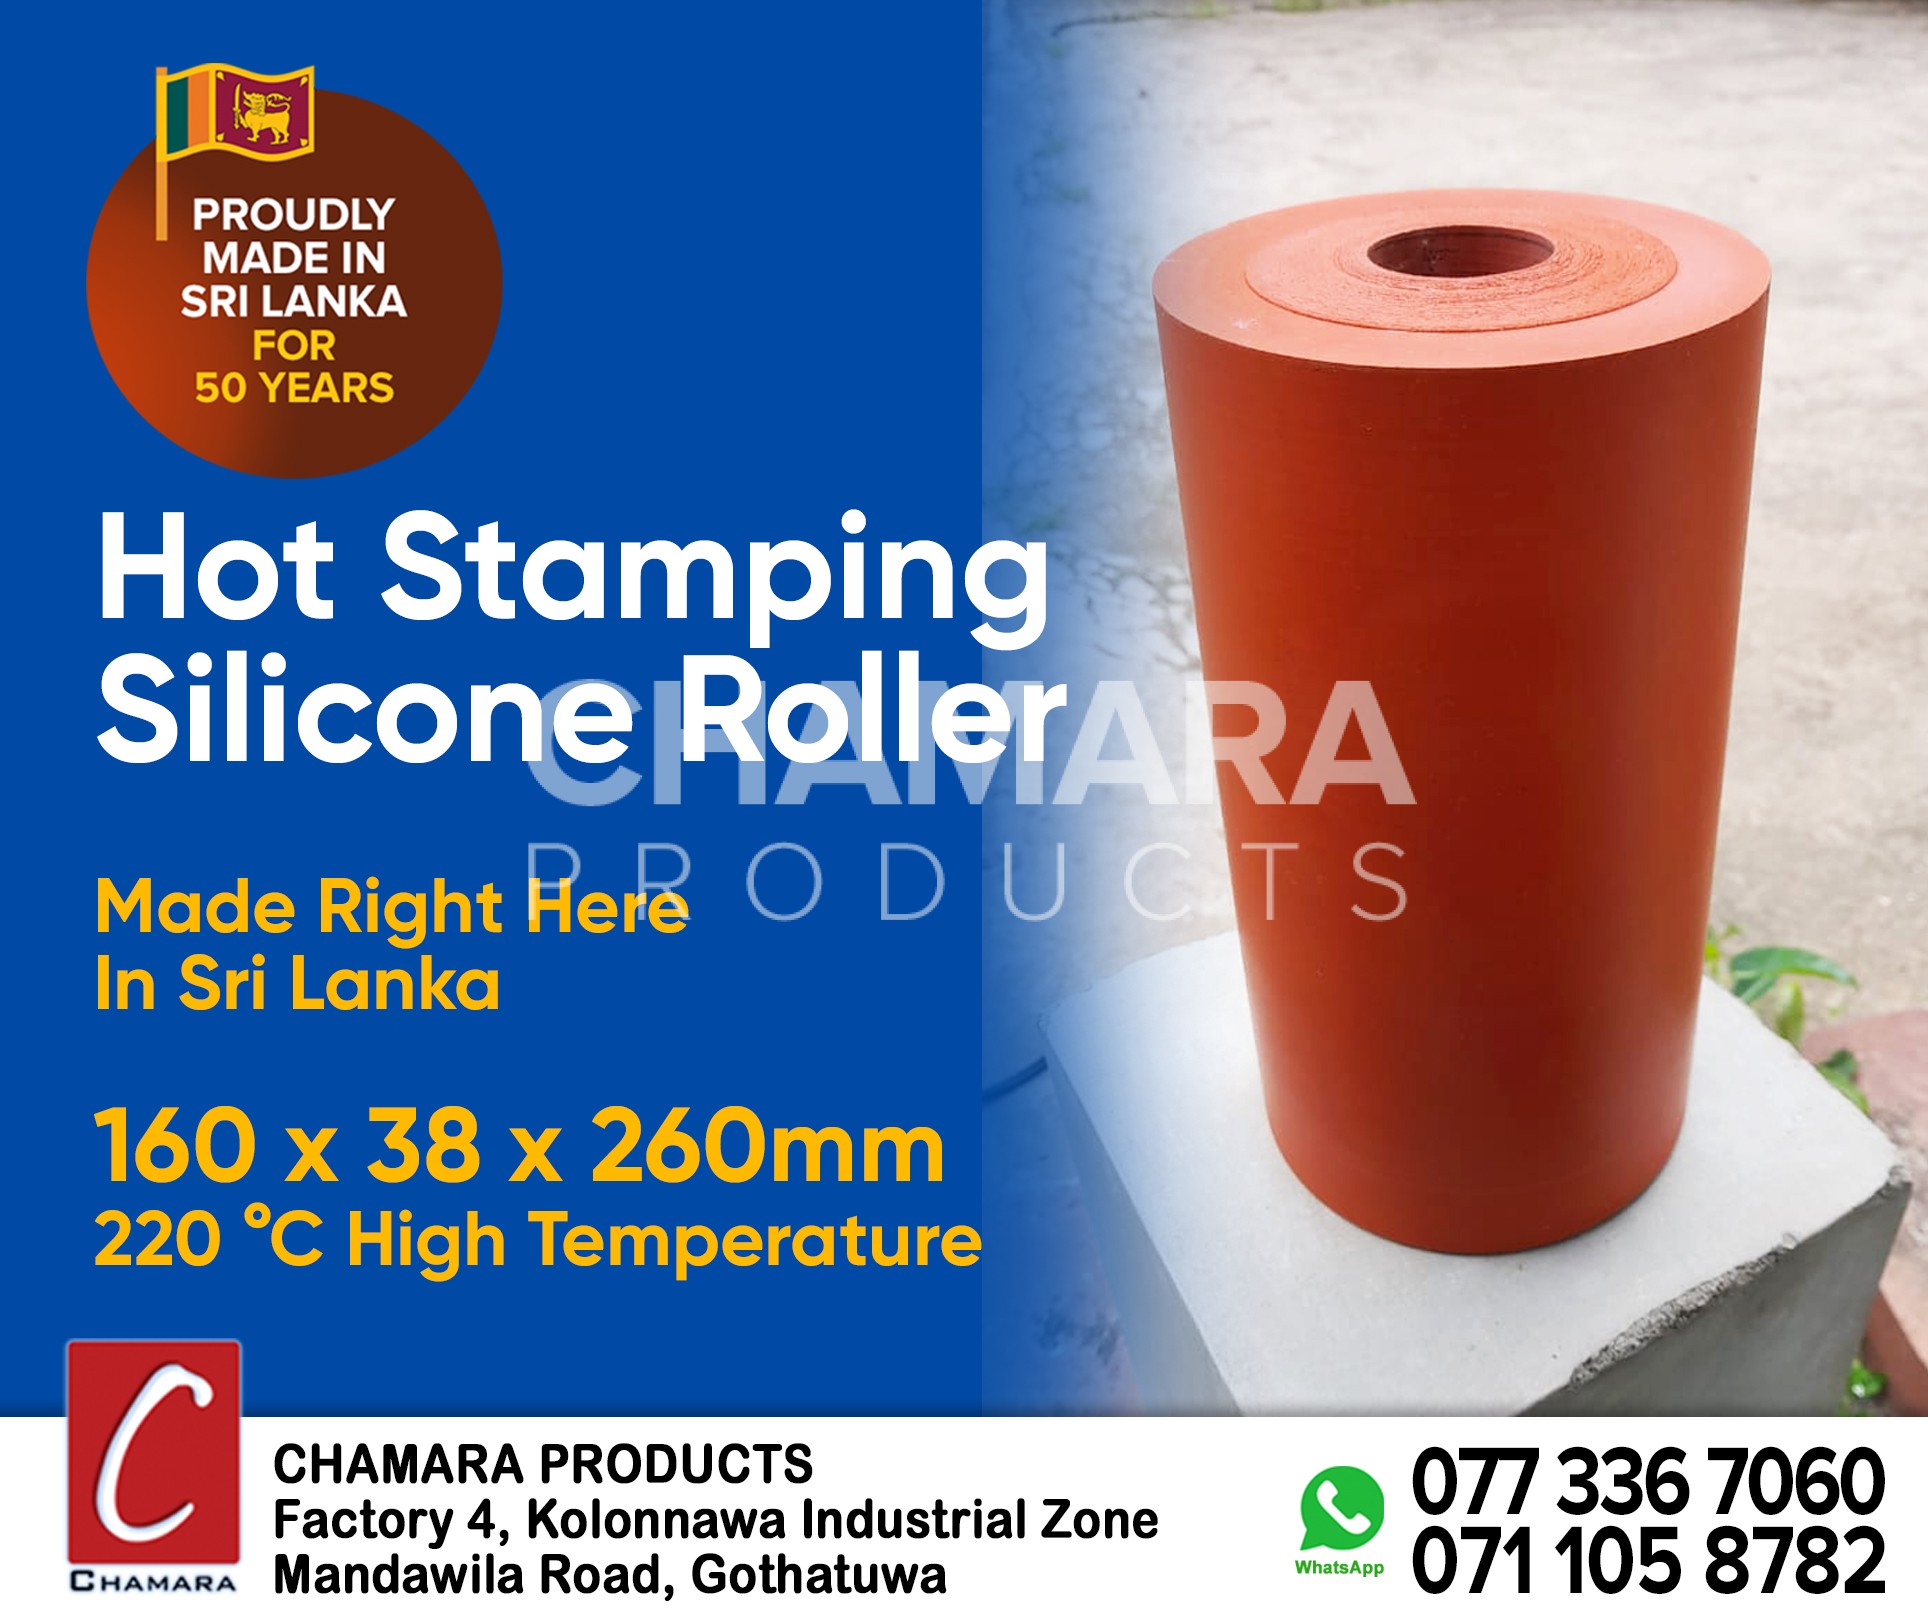 Hot Stamping Silicone Roller Made In Sri Lanka